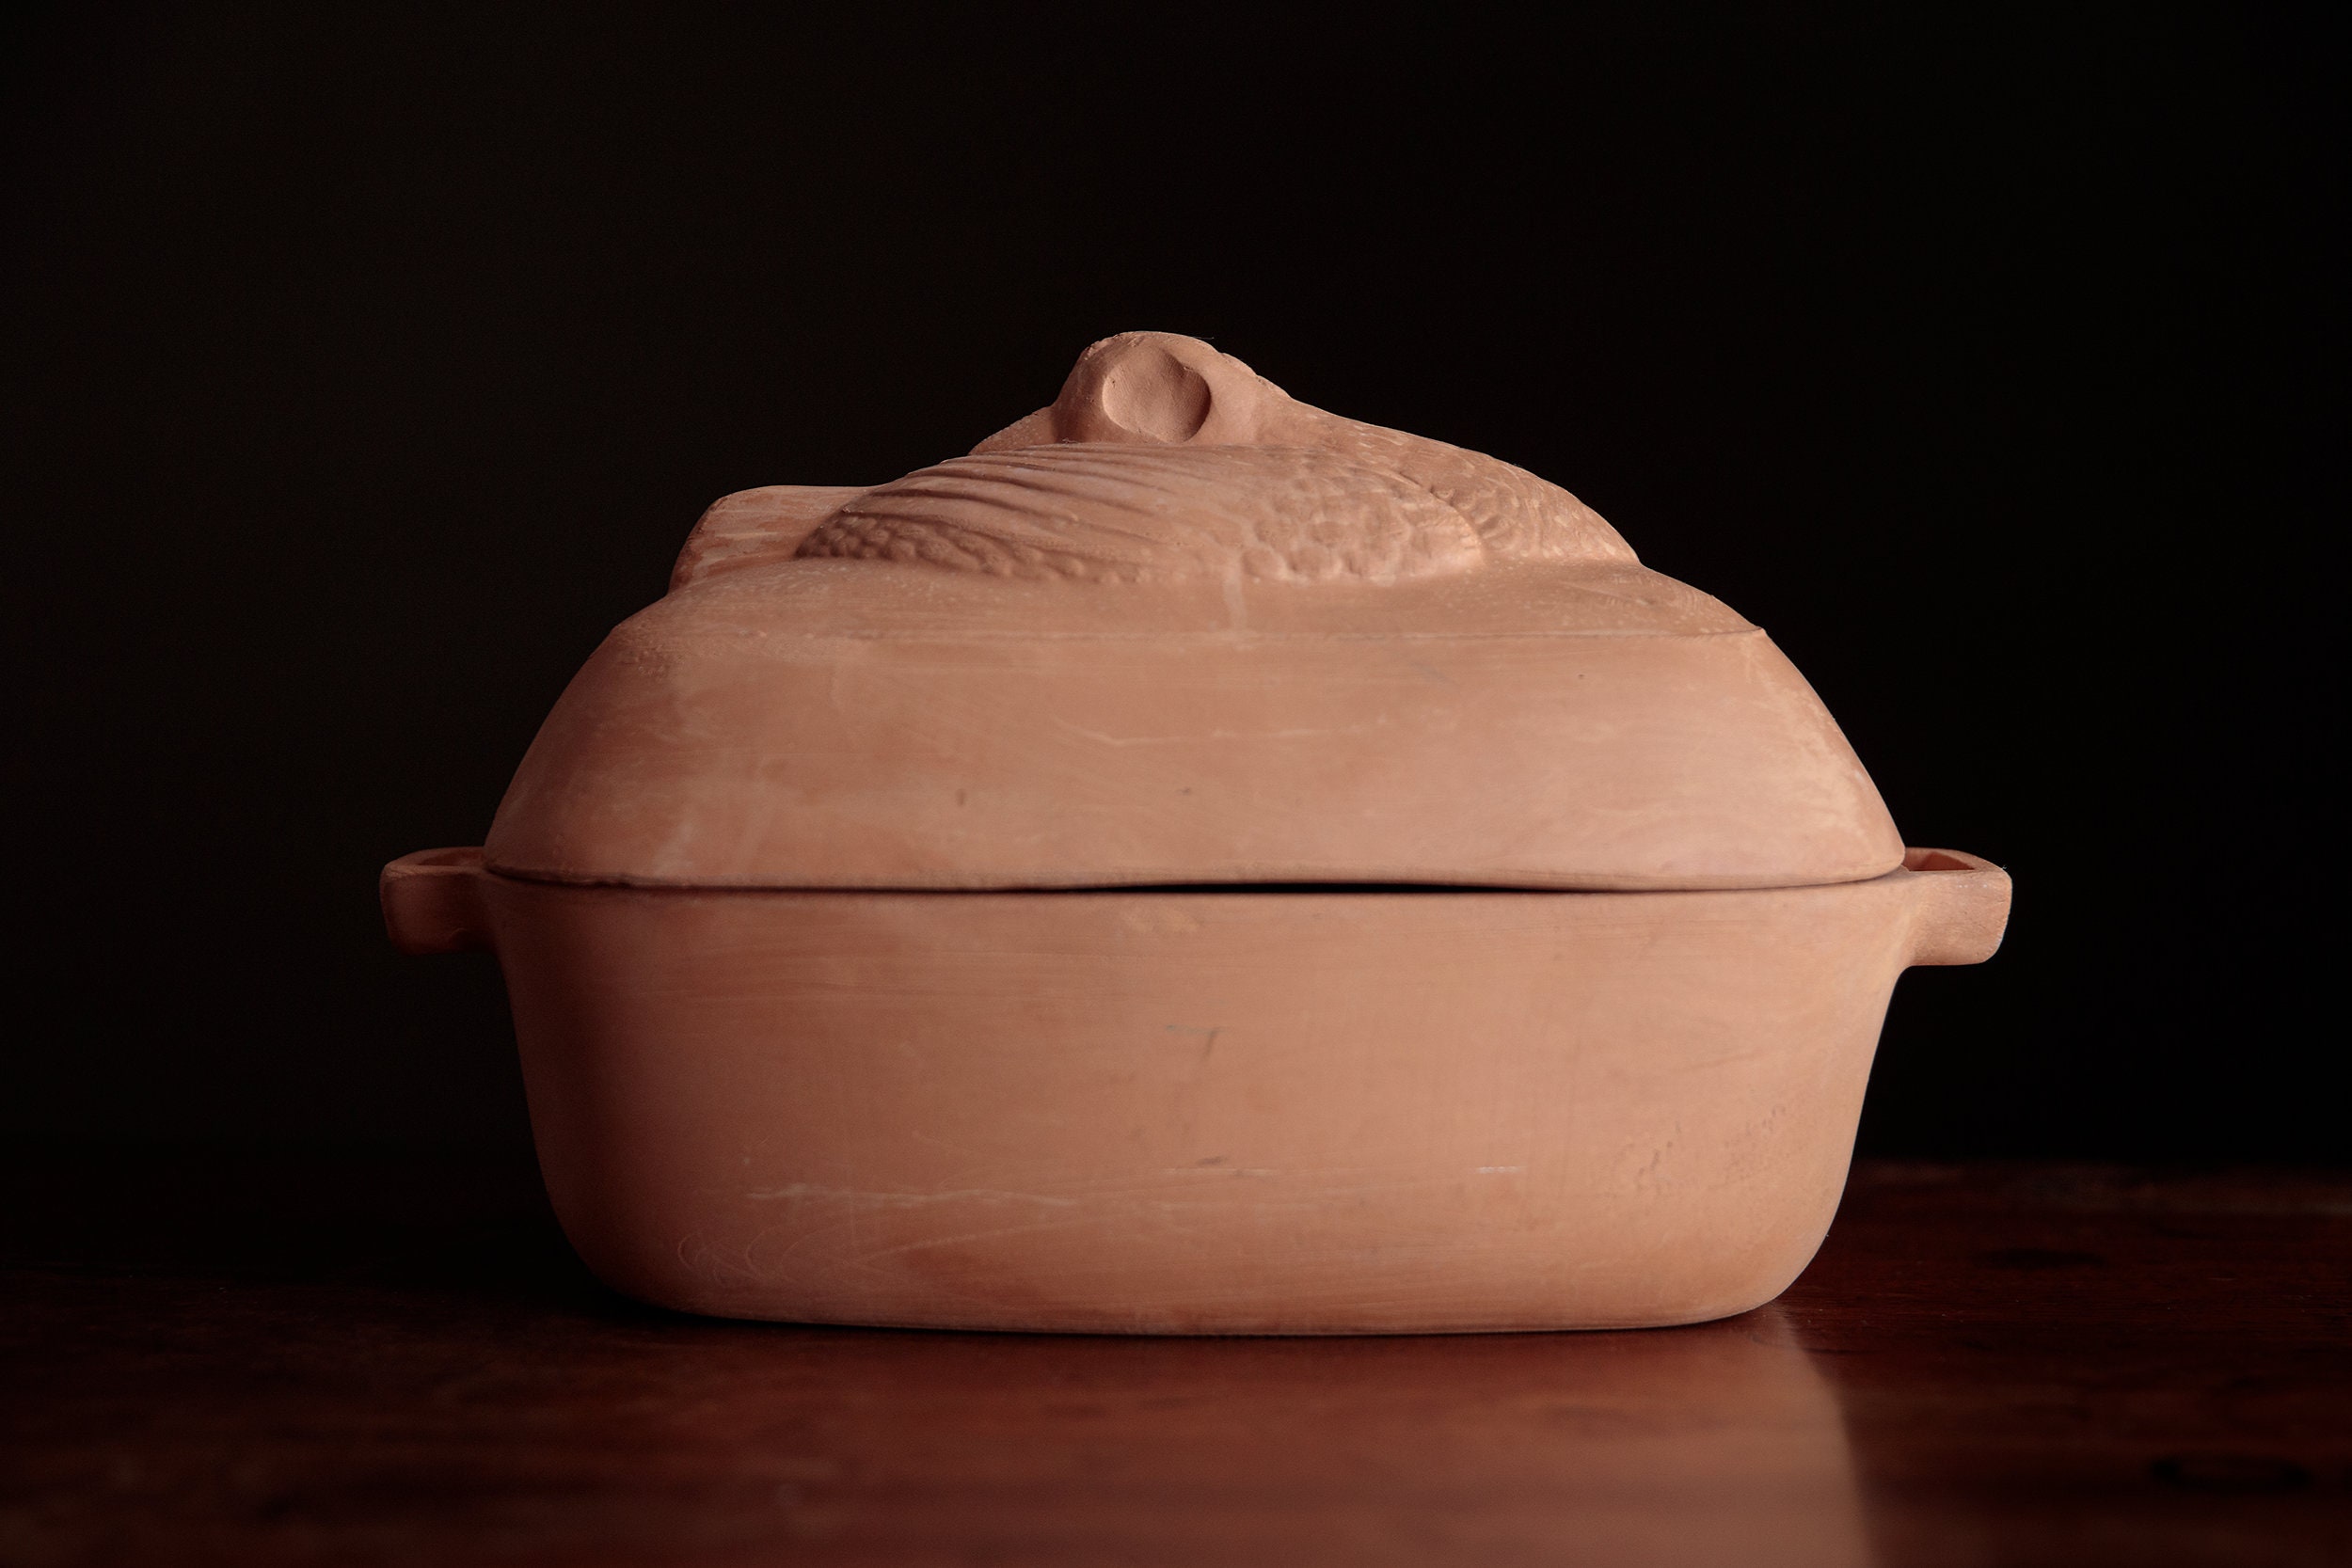 Ceramic Baking Clay Pot Cooking Ceramic Baking Dish Handcrafted